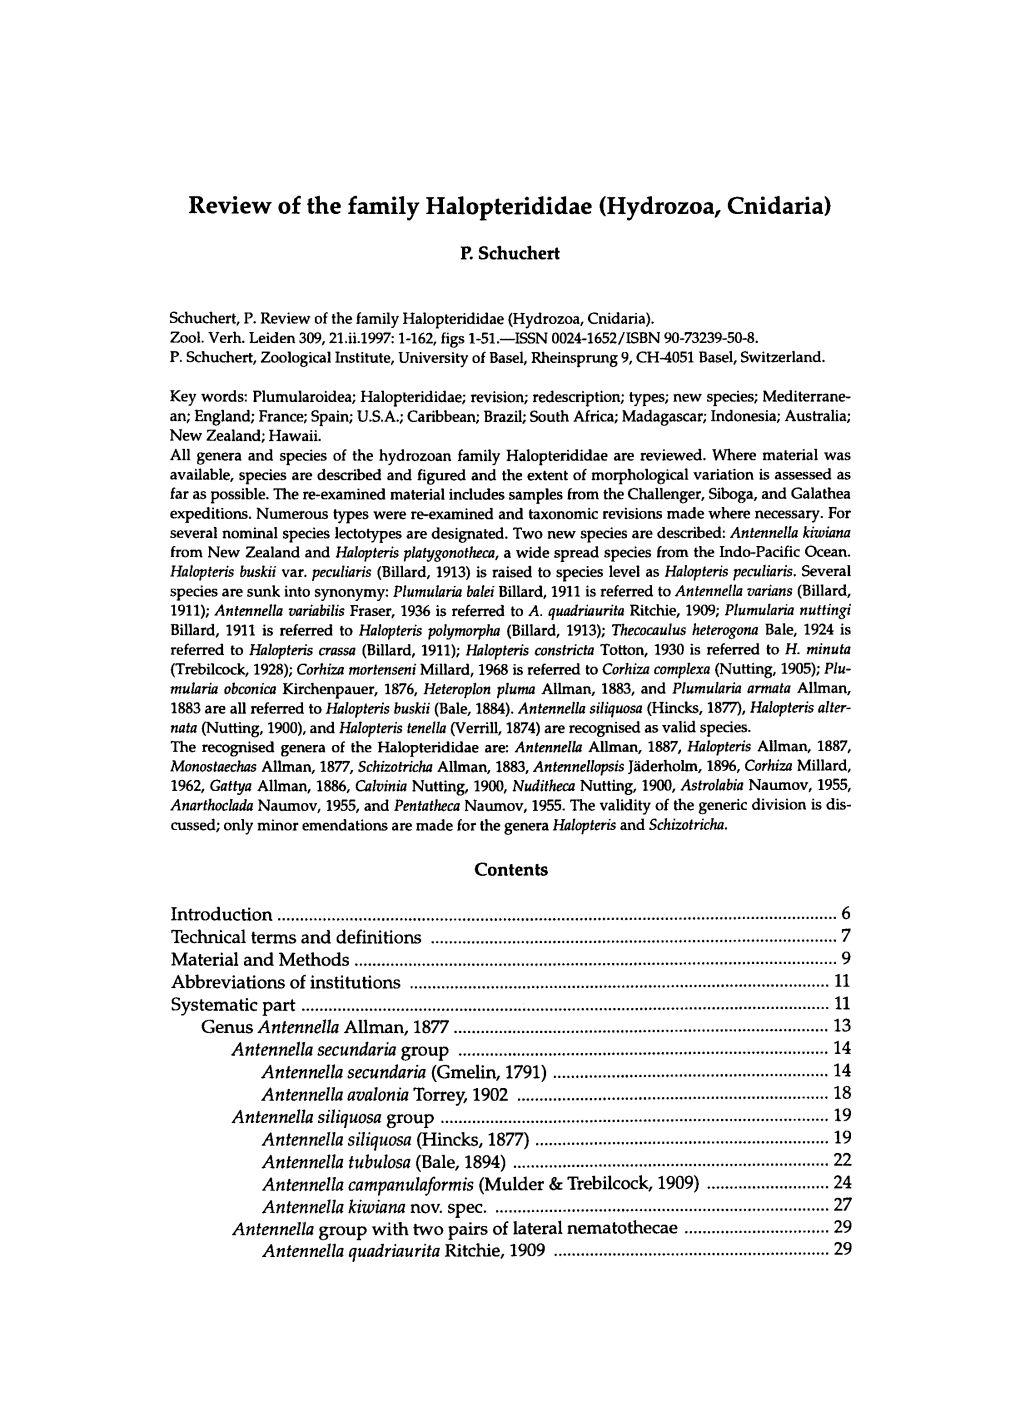 Review of the Family Halopterididae (Hydrozoa, Cnidaria)